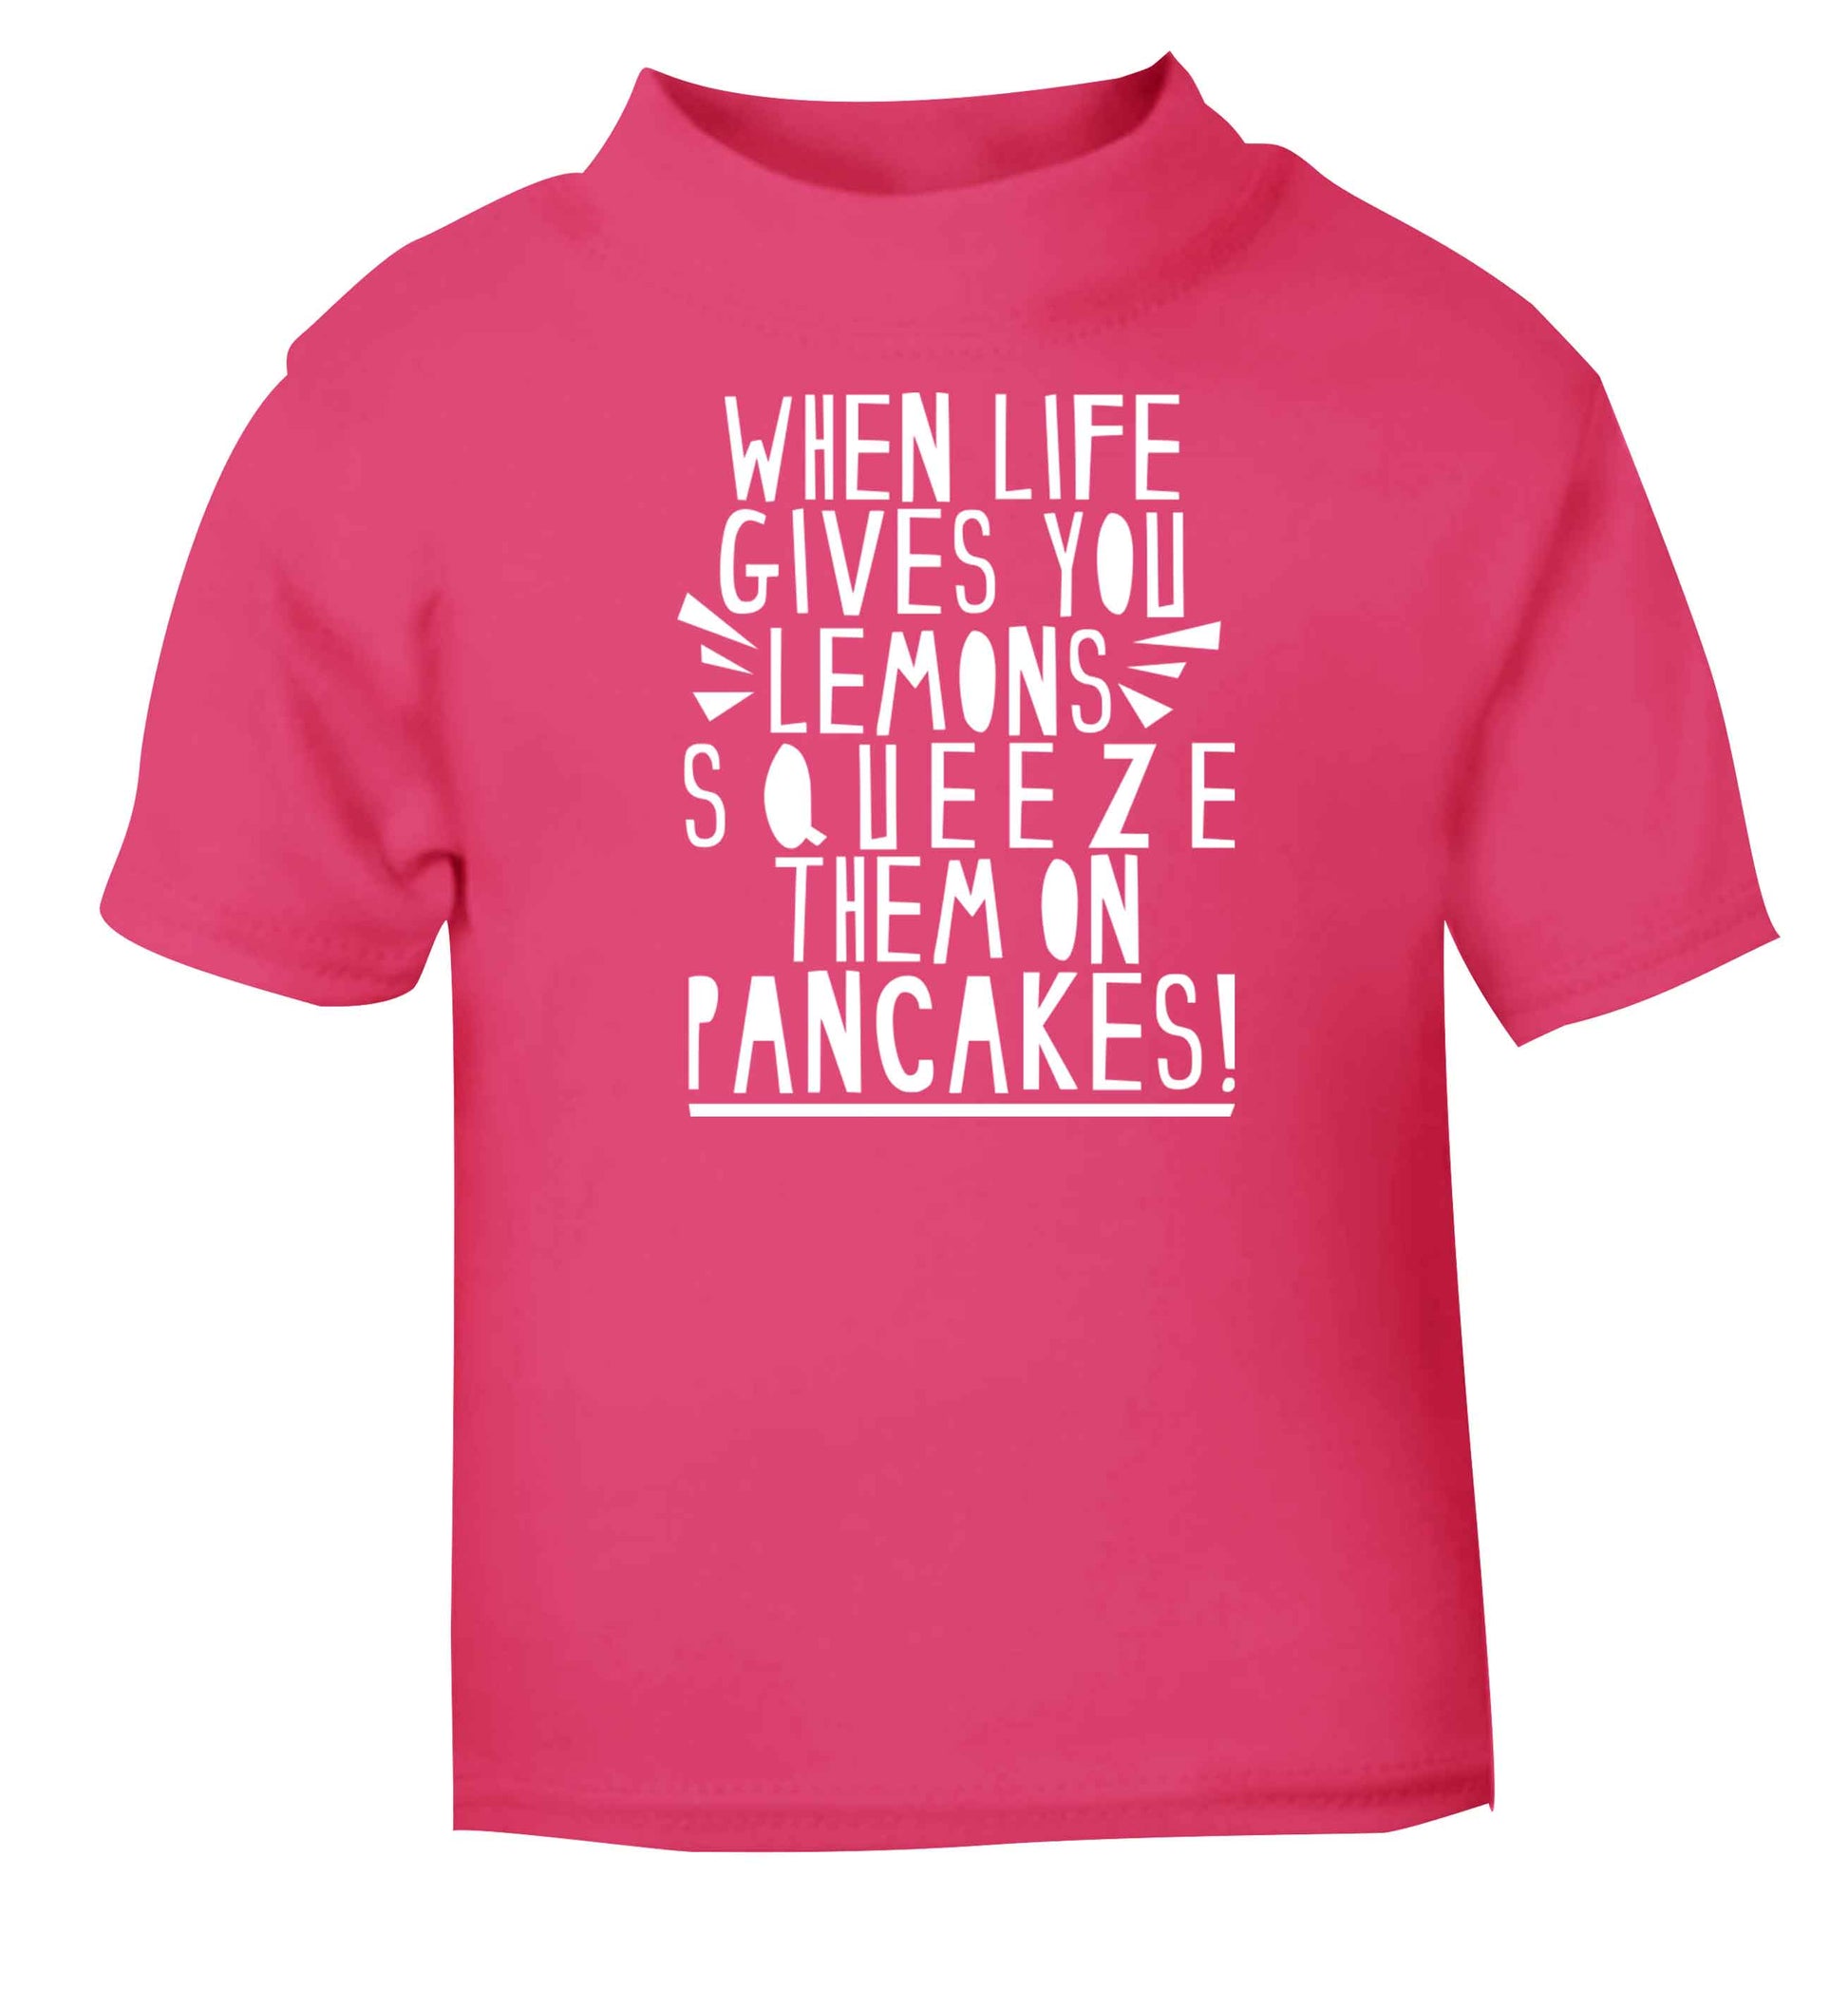 When life gives you lemons squeeze them on pancakes! pink baby toddler Tshirt 2 Years